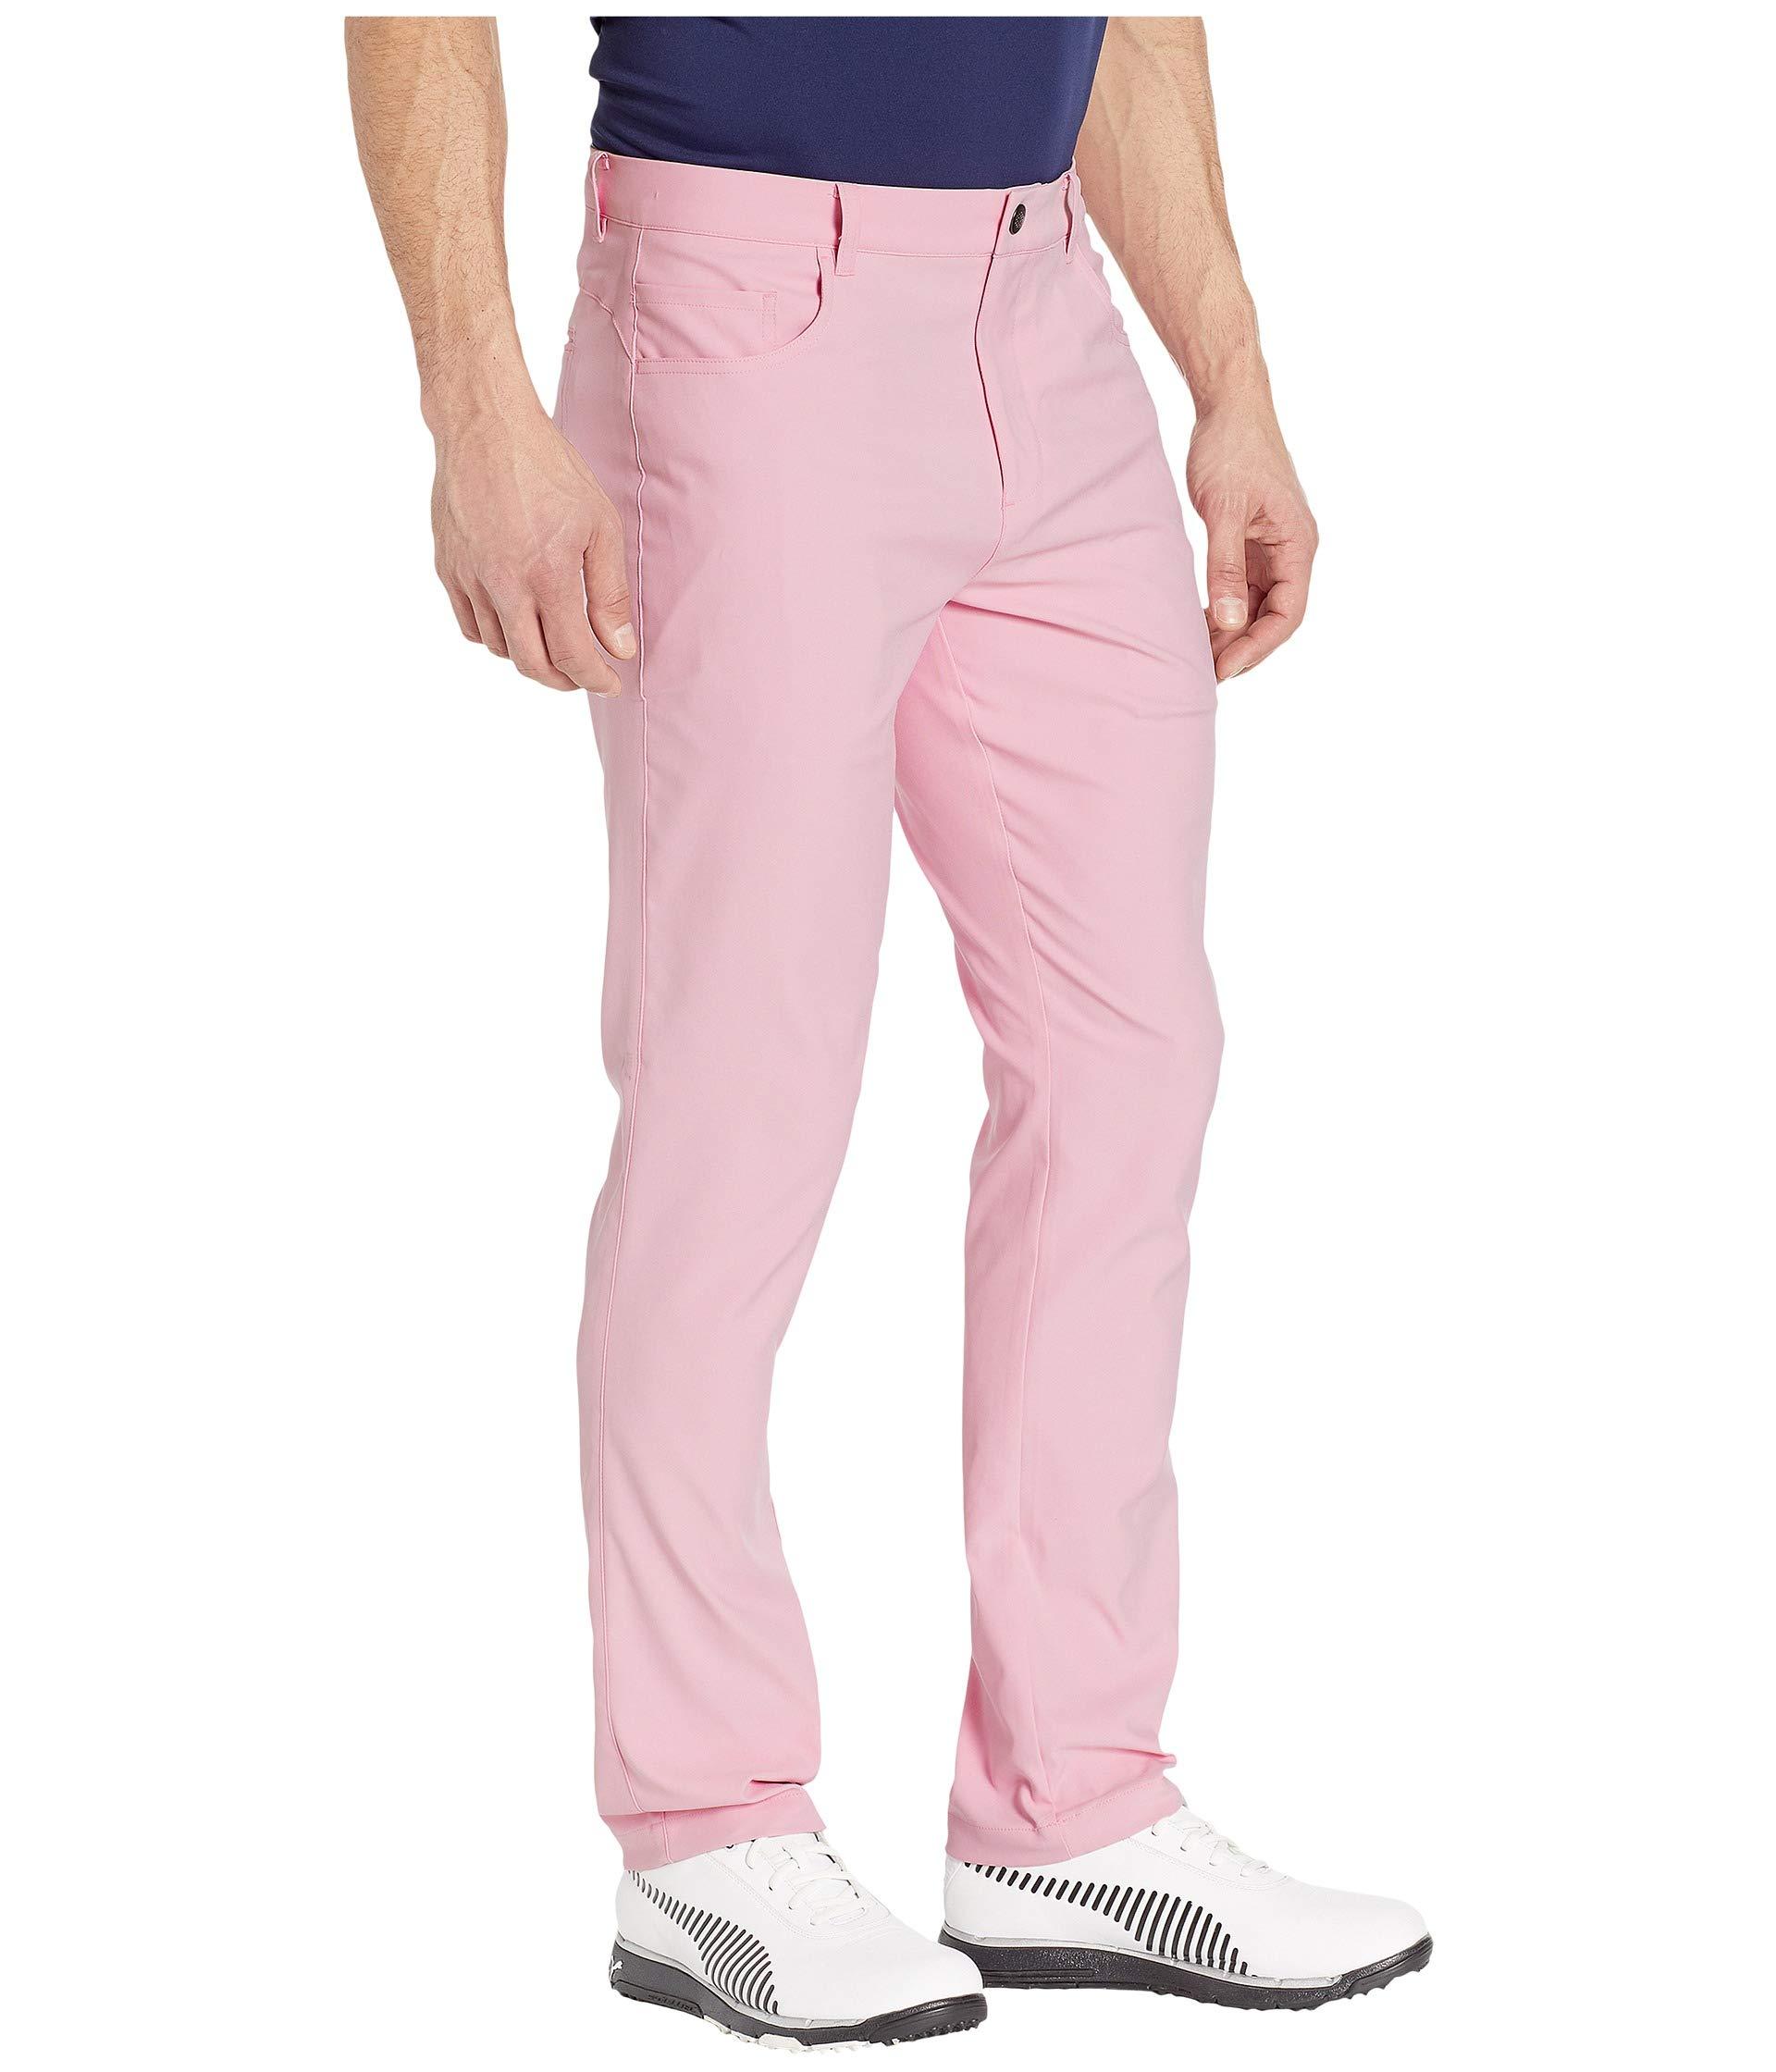 PUMA Synthetic Jackpot Five-pocket Pants (surf The Web) Men's Casual Pants  in Pale Pink (Pink) for Men - Lyst